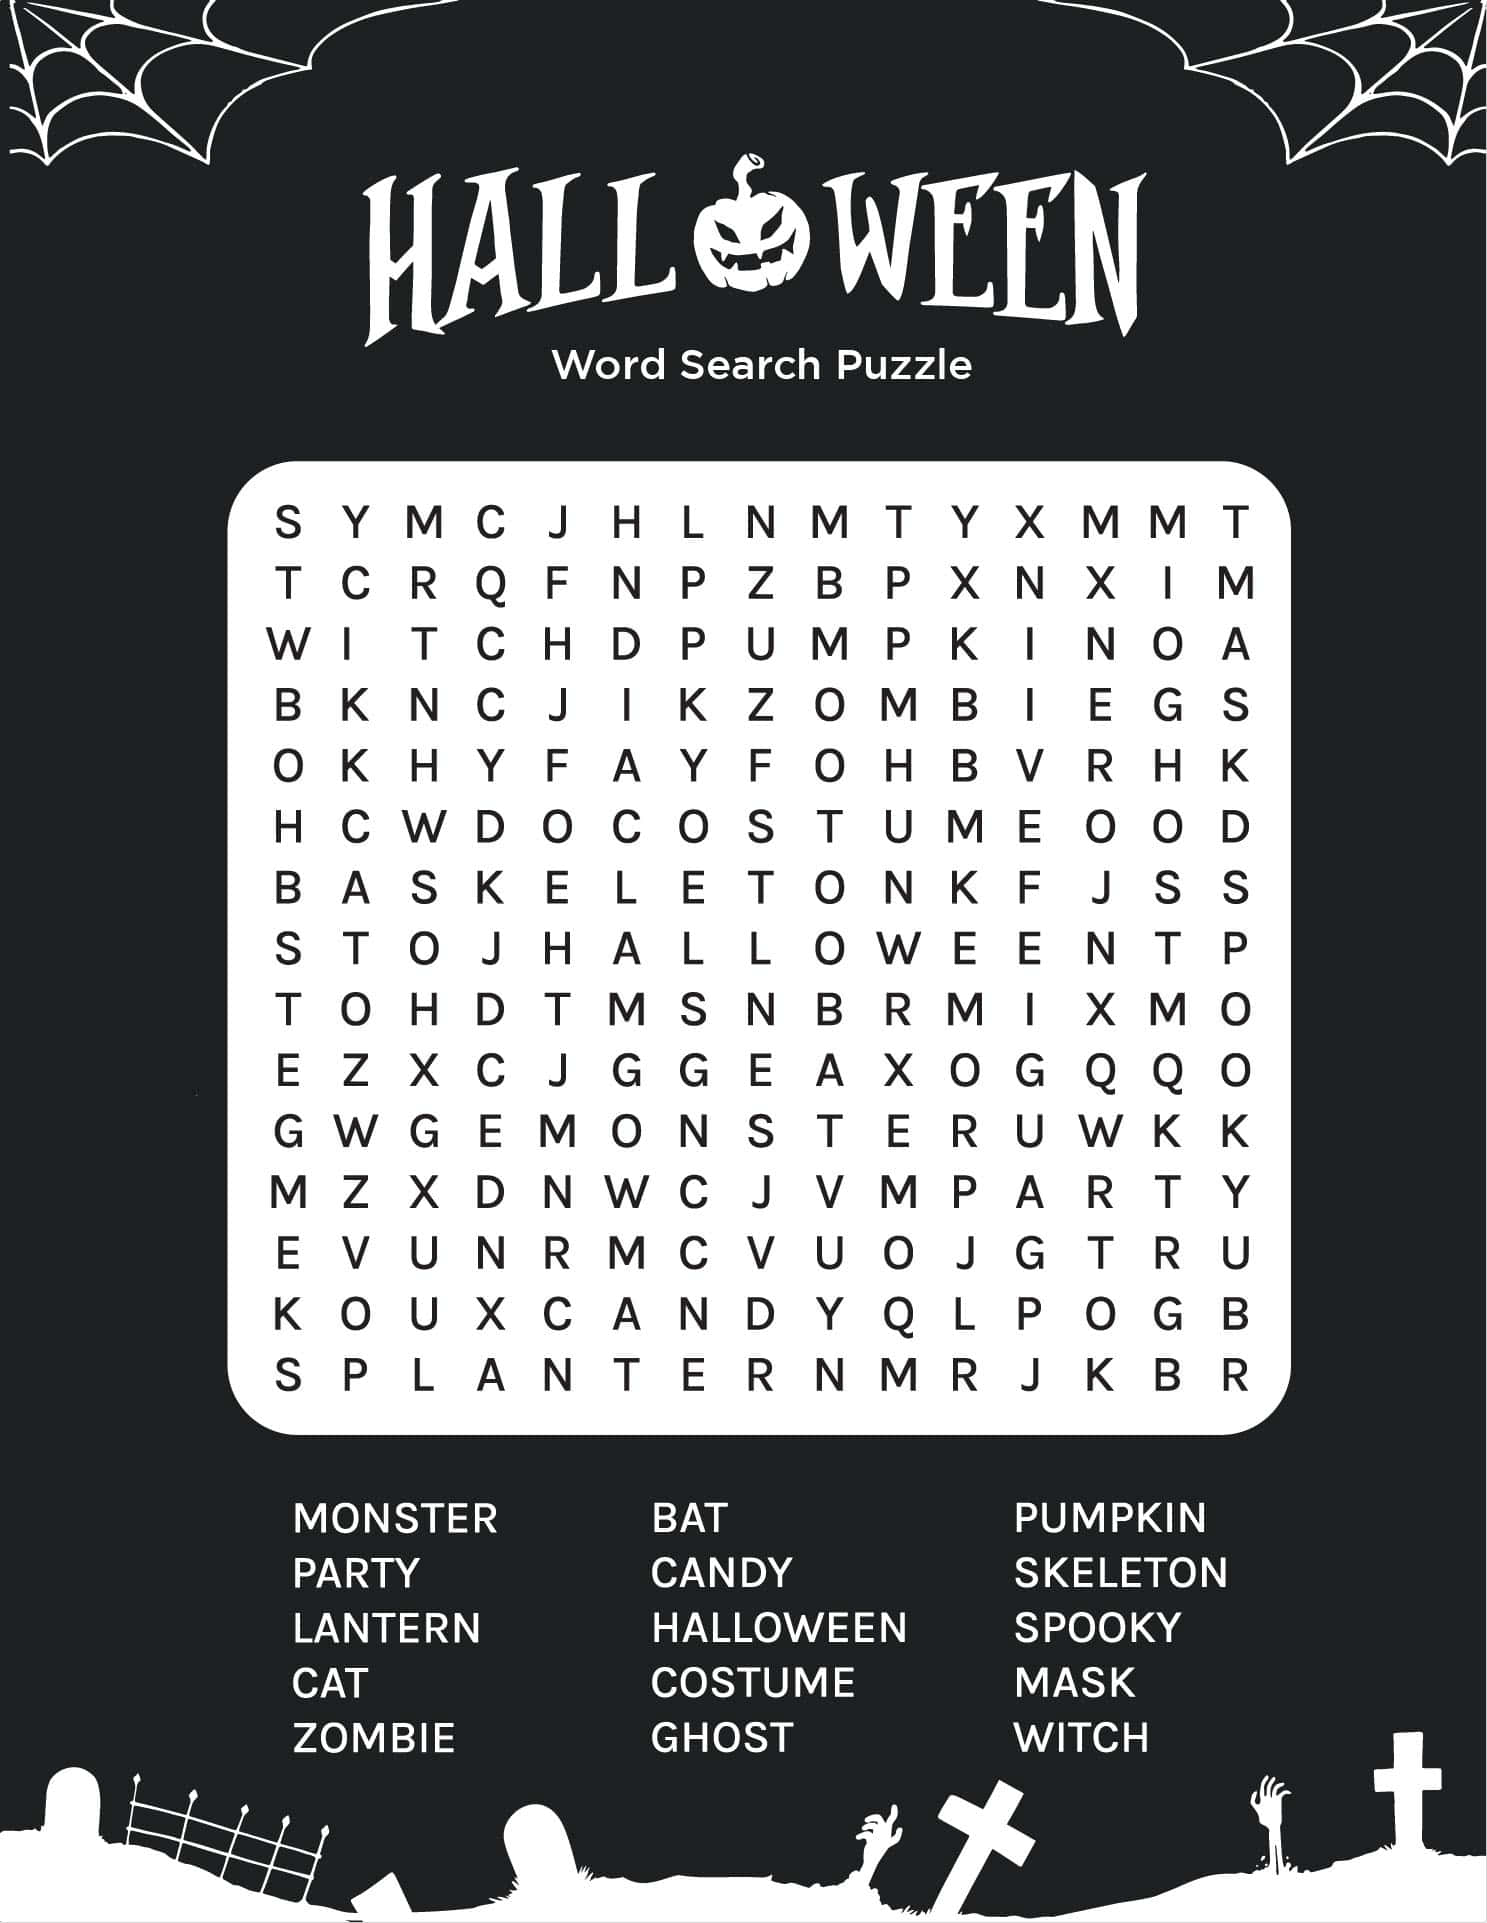 Get in the Halloween spirit with these fun puzzles! Wallpaper